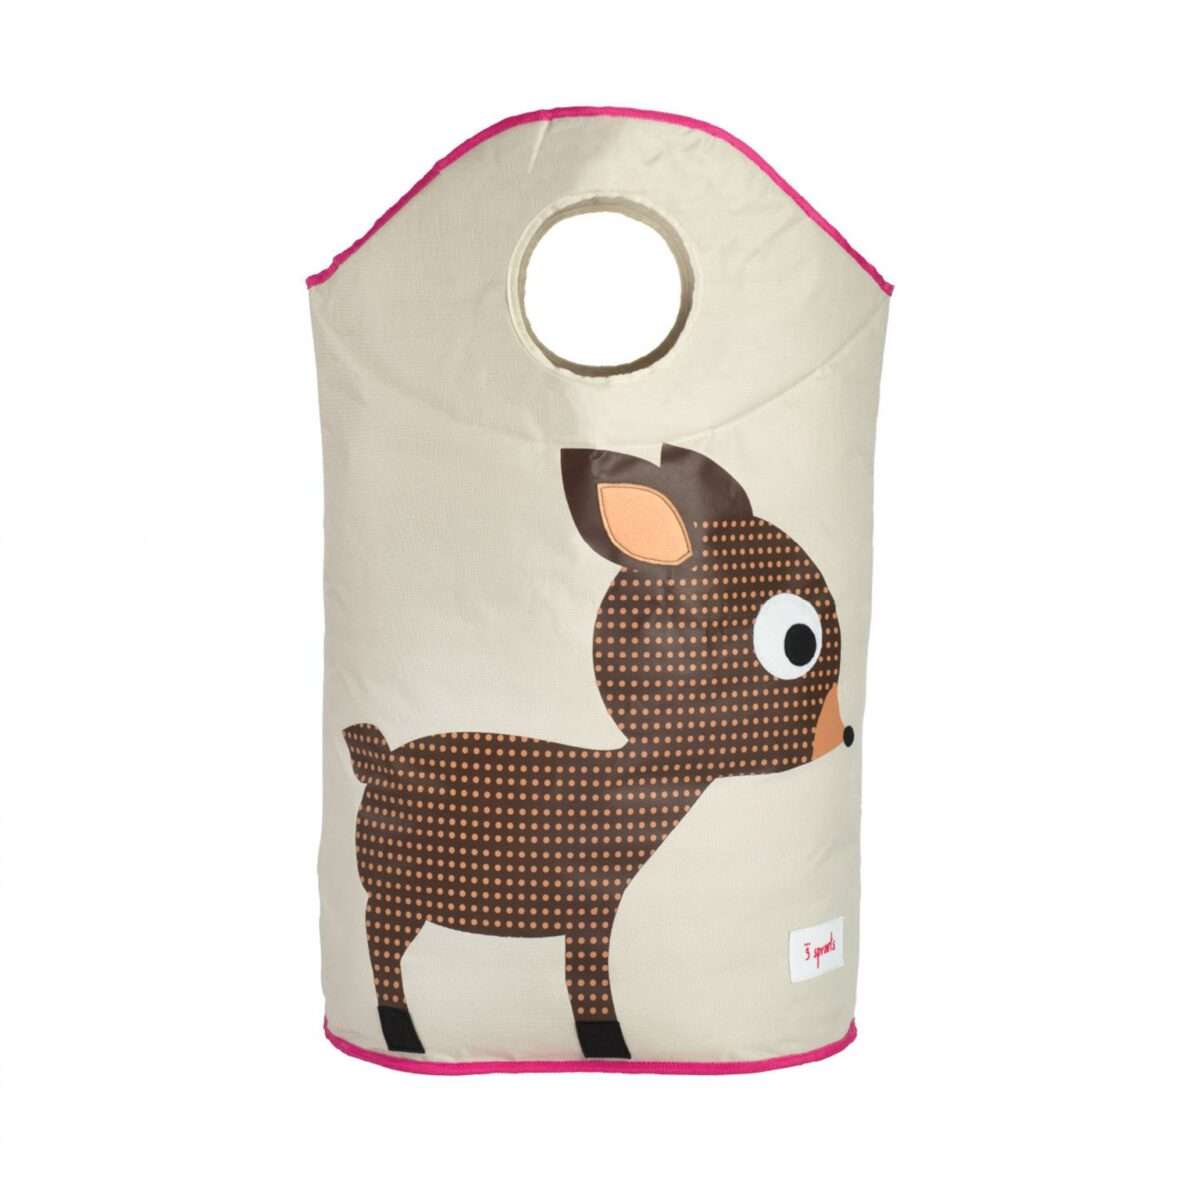 LHDEE 3Sprouts Laundry Hamper Deer 2 1536x1536 1